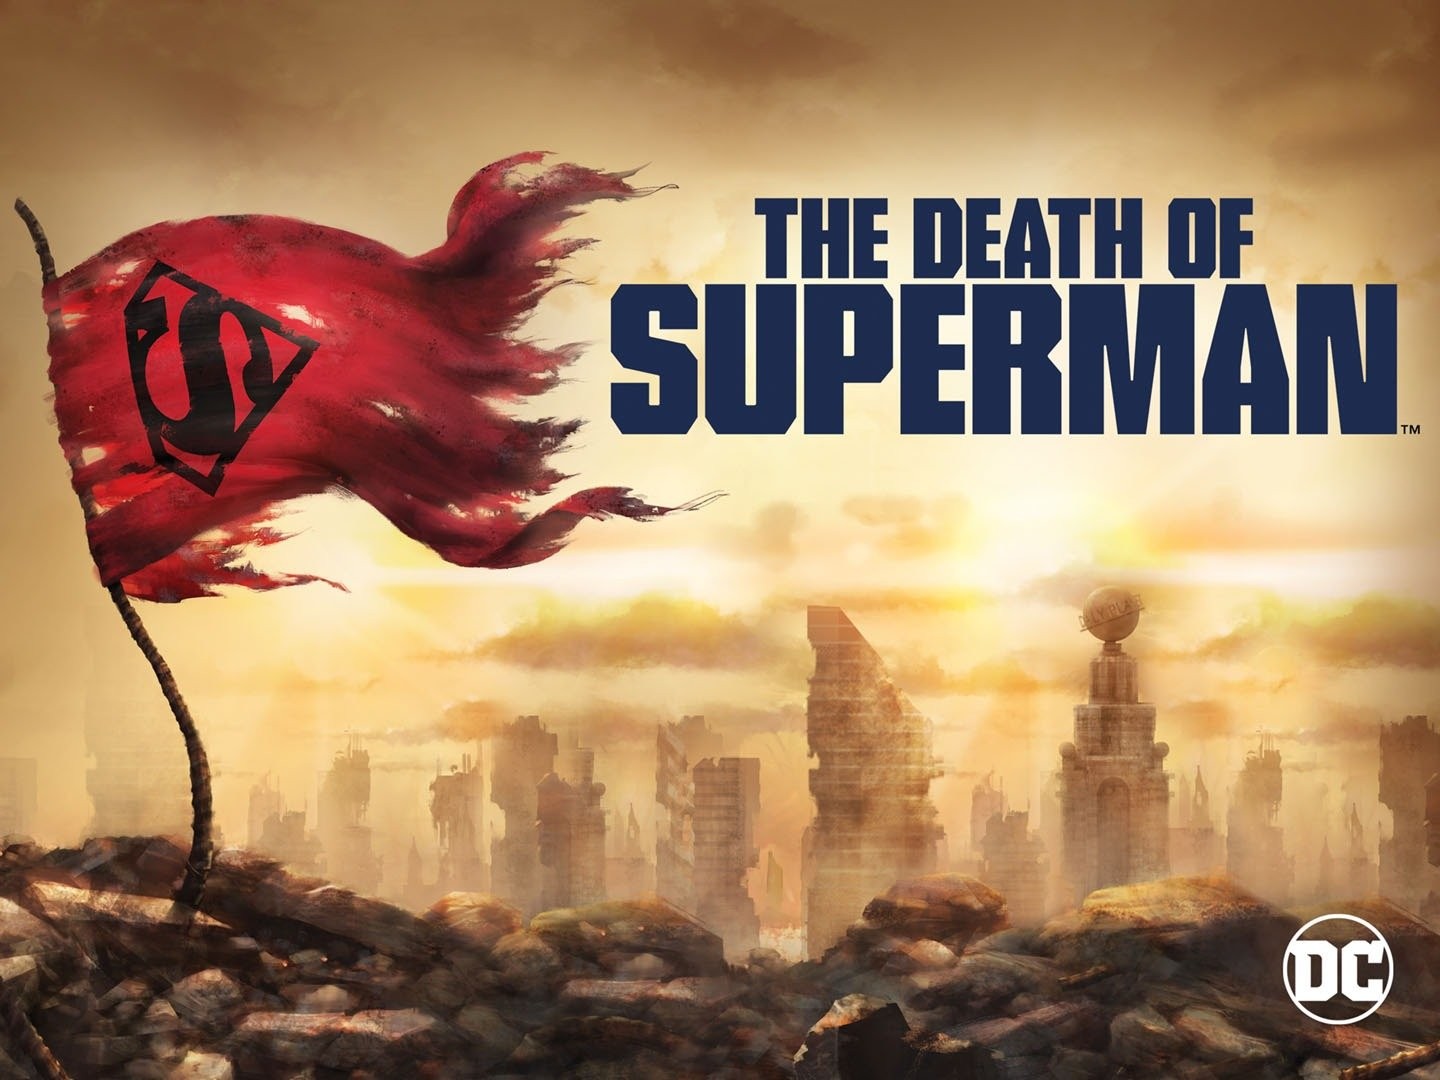 The Death of Superman - Rotten Tomatoes